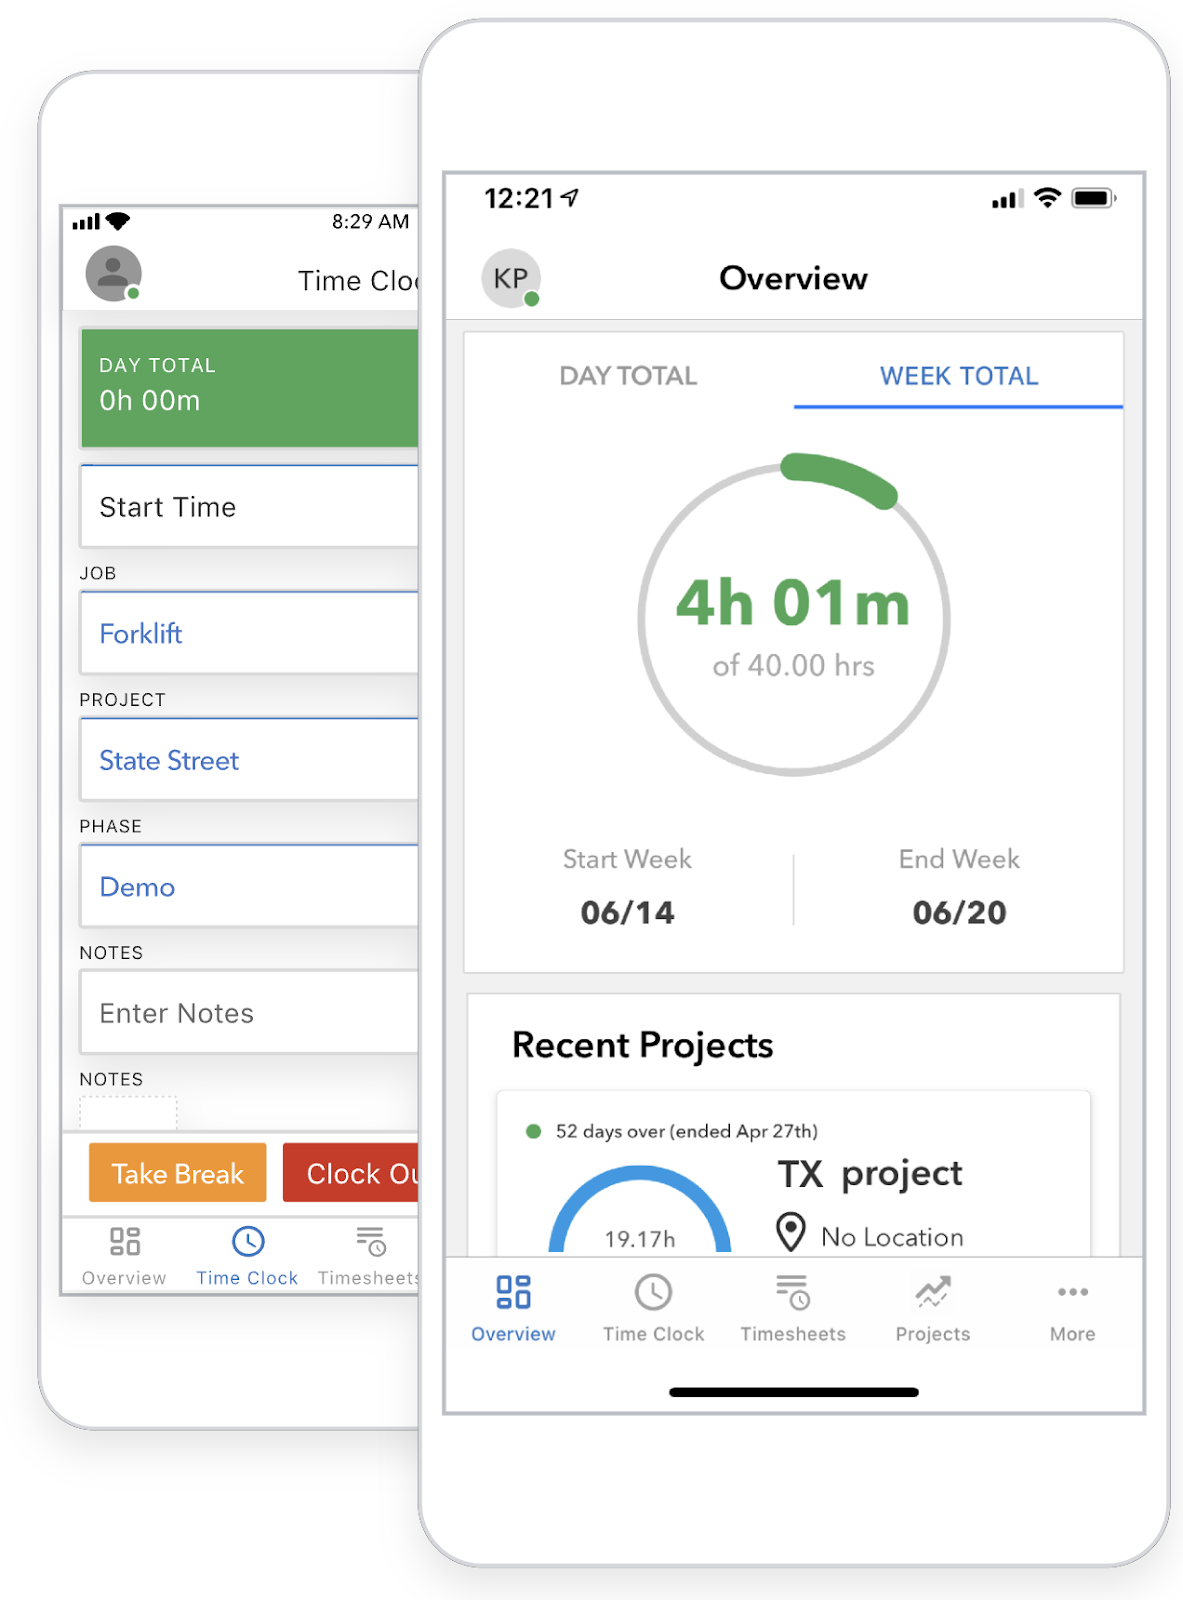 With QuickBooks Time Mobile, employees can easily clock in and out from a job site on their phones without having to resort to pen-and-paper tracking.